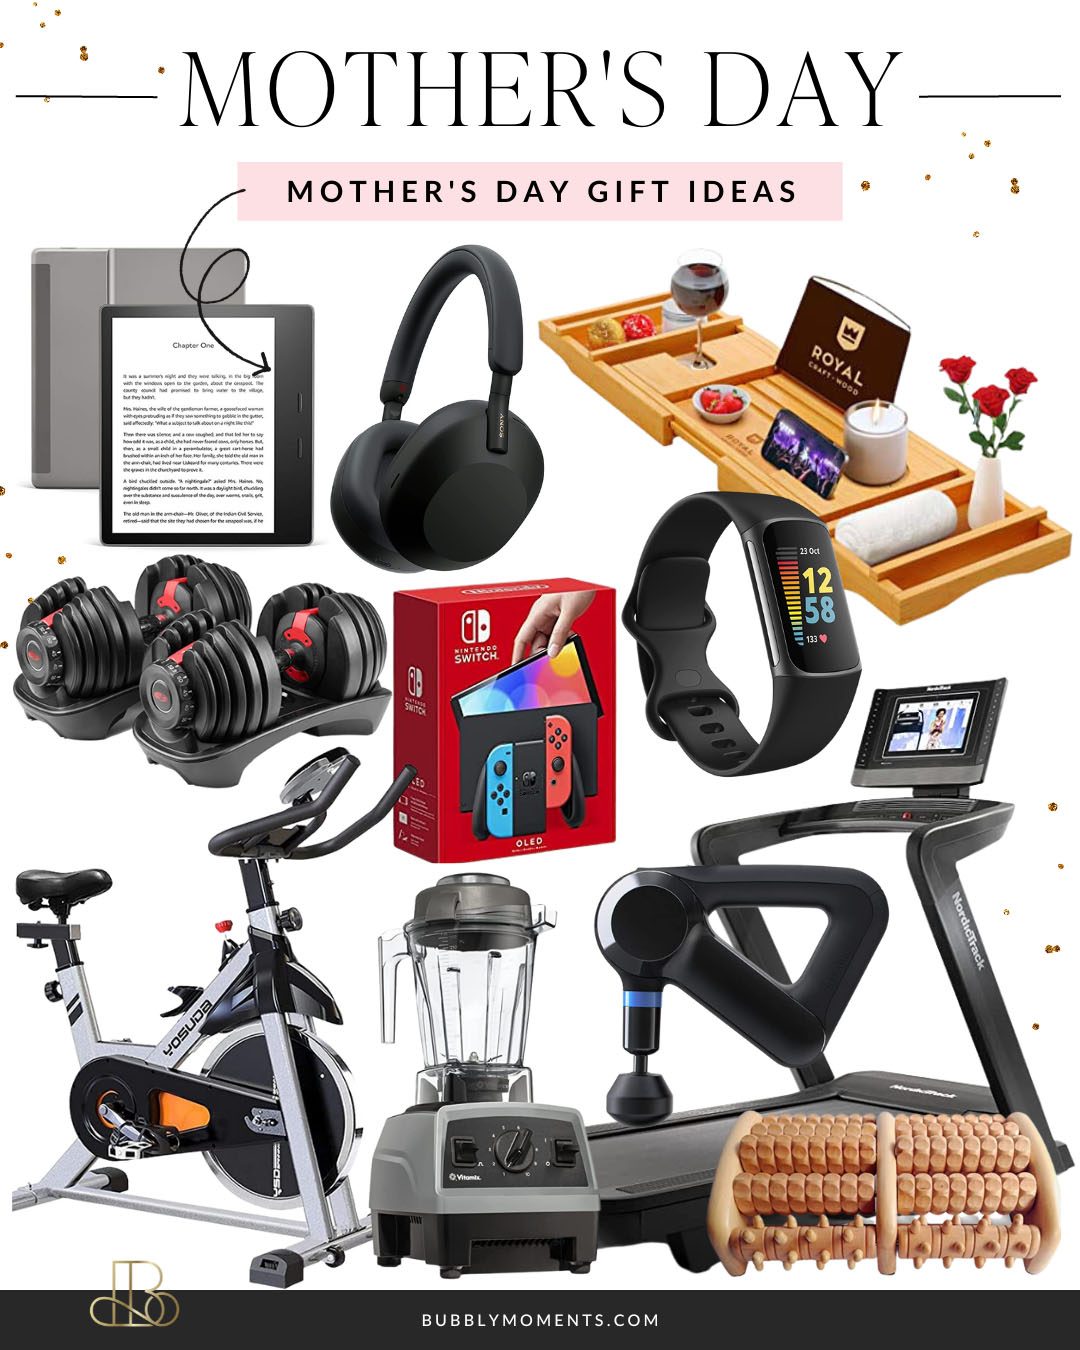 Best Gifts With Next Day Delivery in 2023